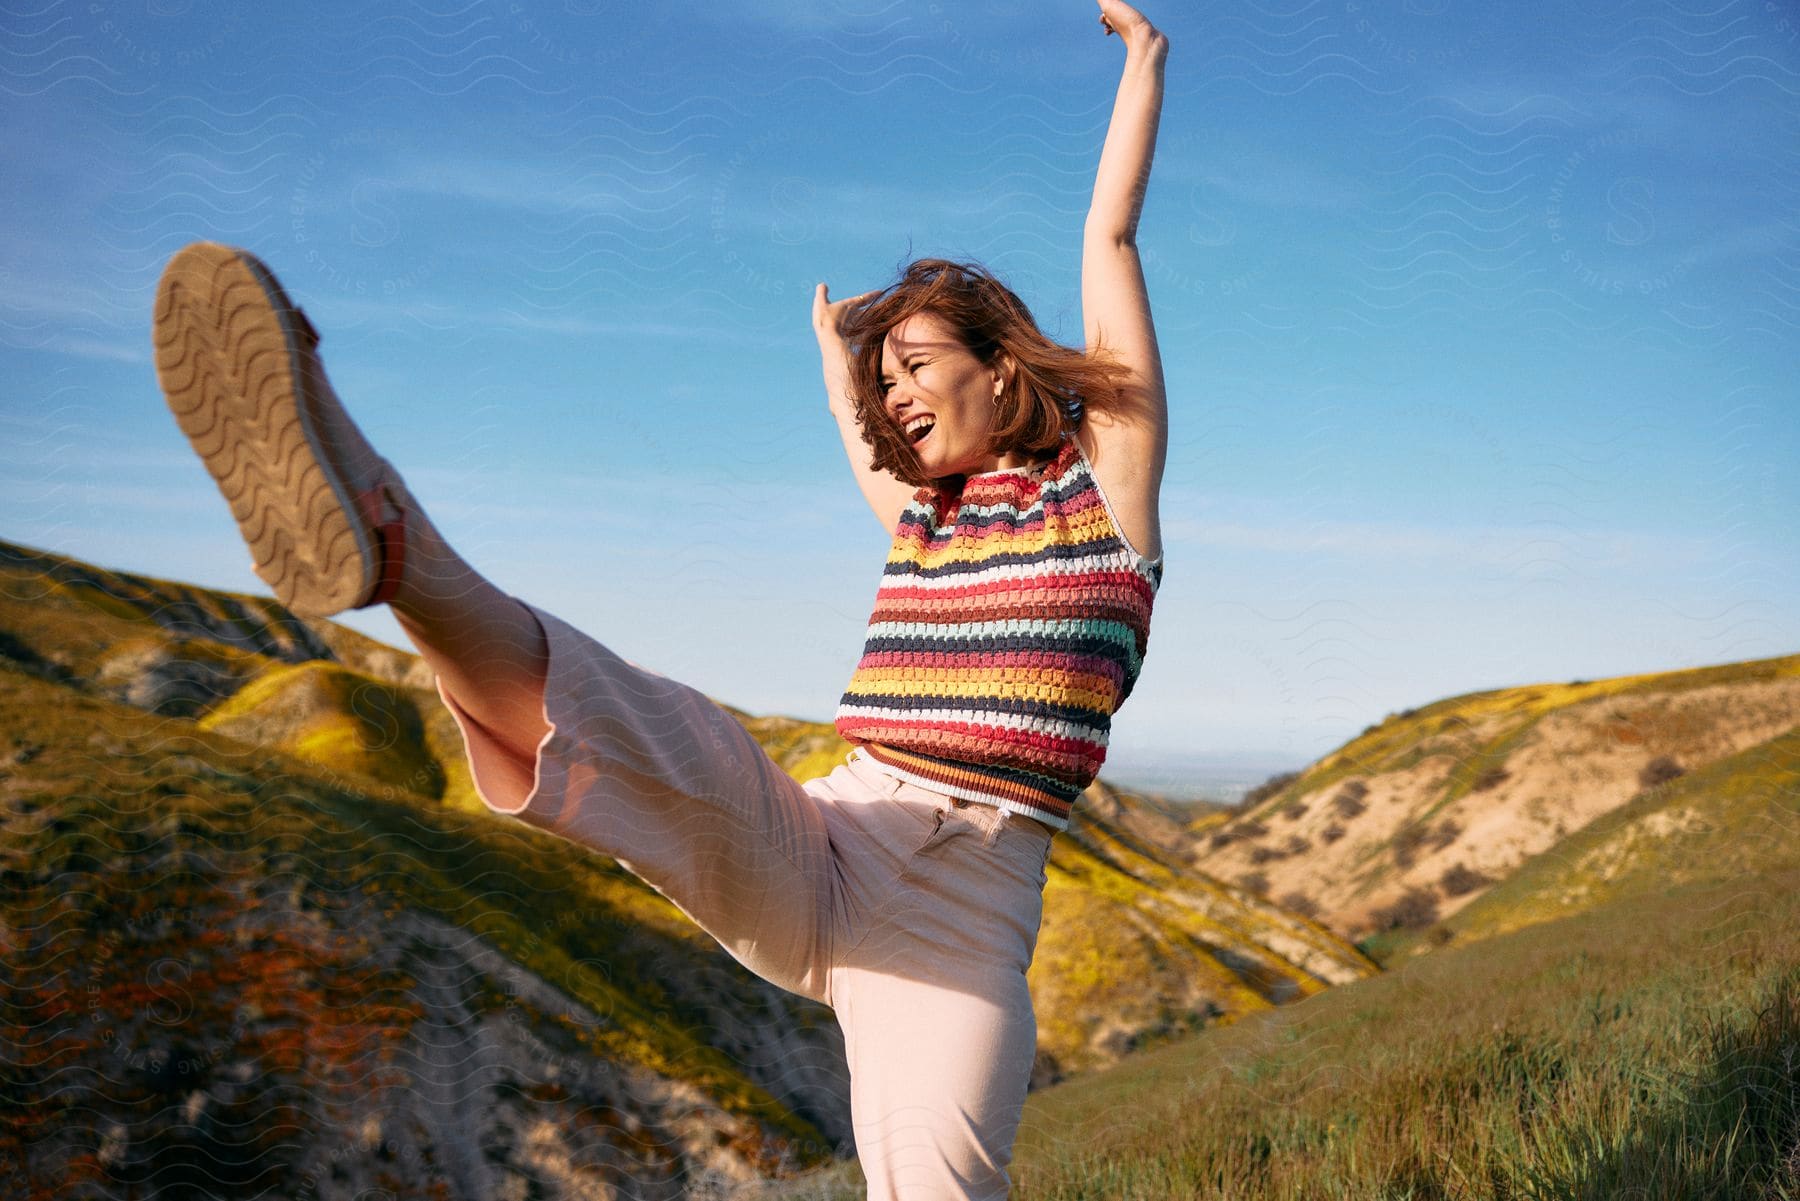 A joyful woman in a multicolored sweater and orange pink pants stands on a grassy hill, arms over head and one leg kicked up in the air, on a sunny day.